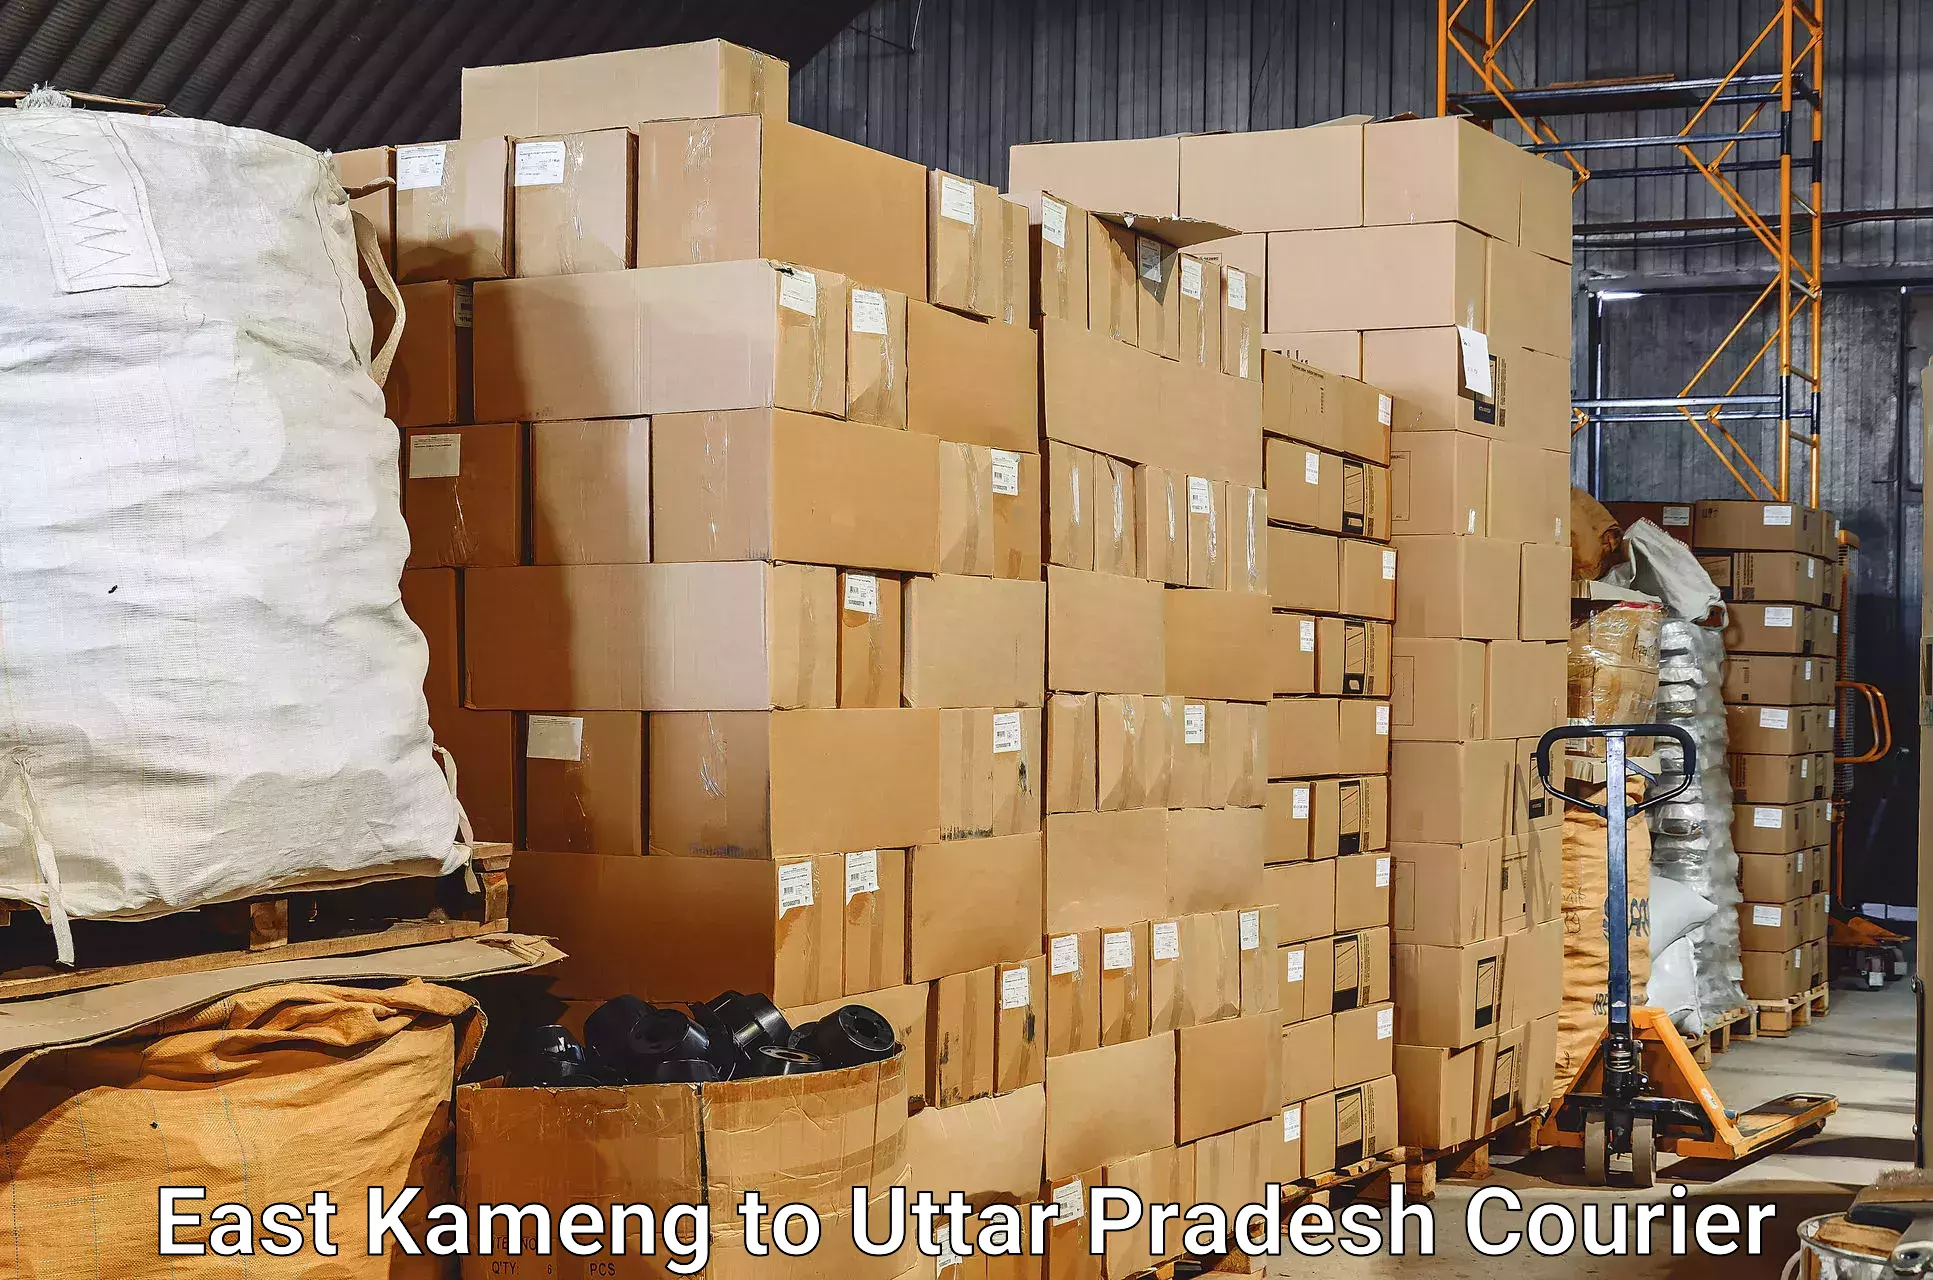 Baggage transport network East Kameng to Ayodhya